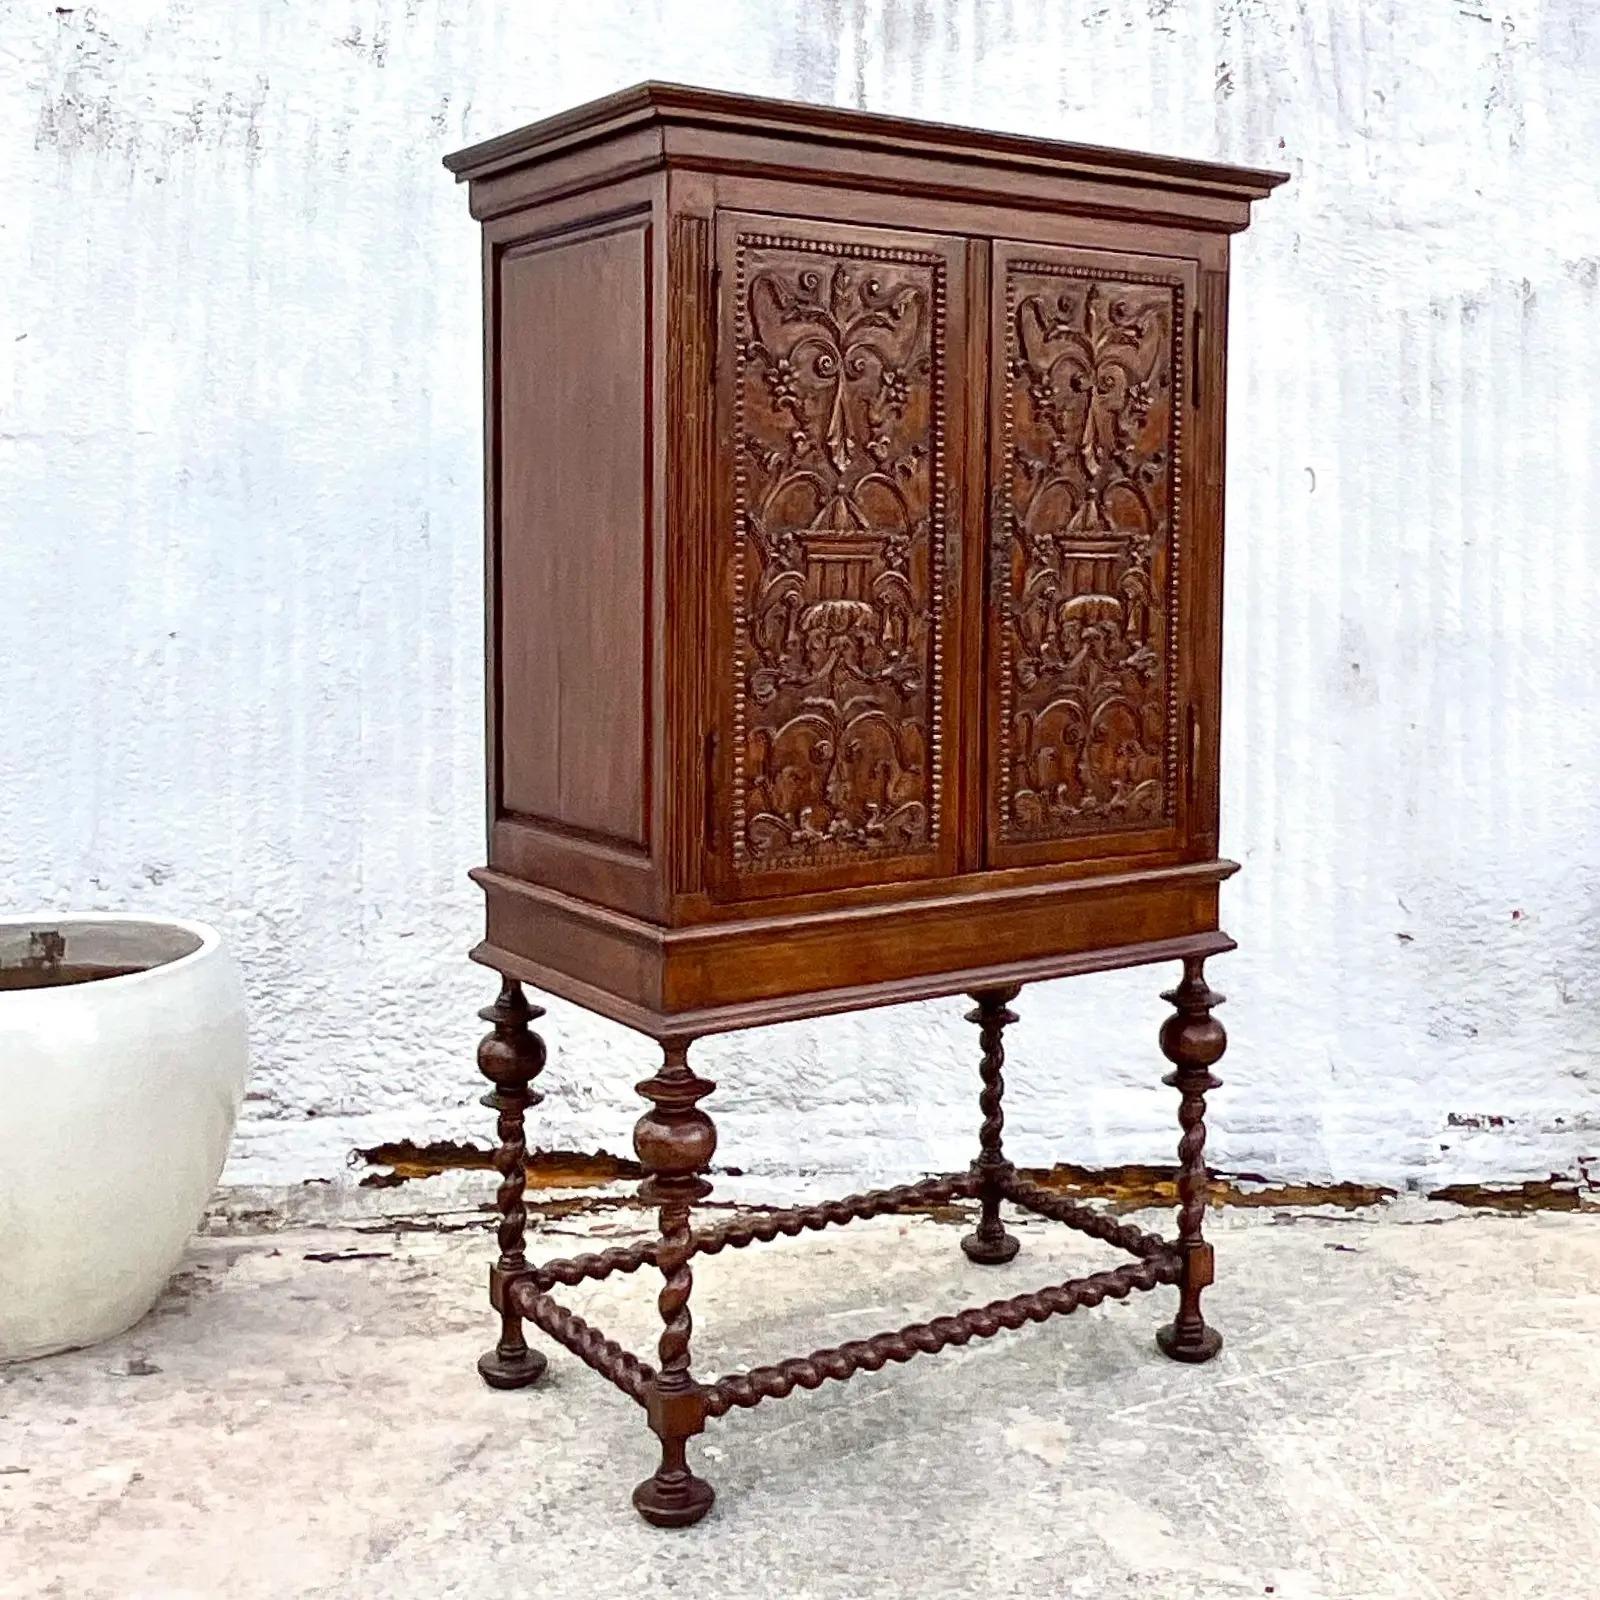 Fantastic vintage Barley twist armoire. Stunning hand carved detail on the cabinet. Top rests on chic Barley Twist pedestal. Lots of great interior storage. Would make an incredible dry bar. Acquired from a Palm Beach estate.